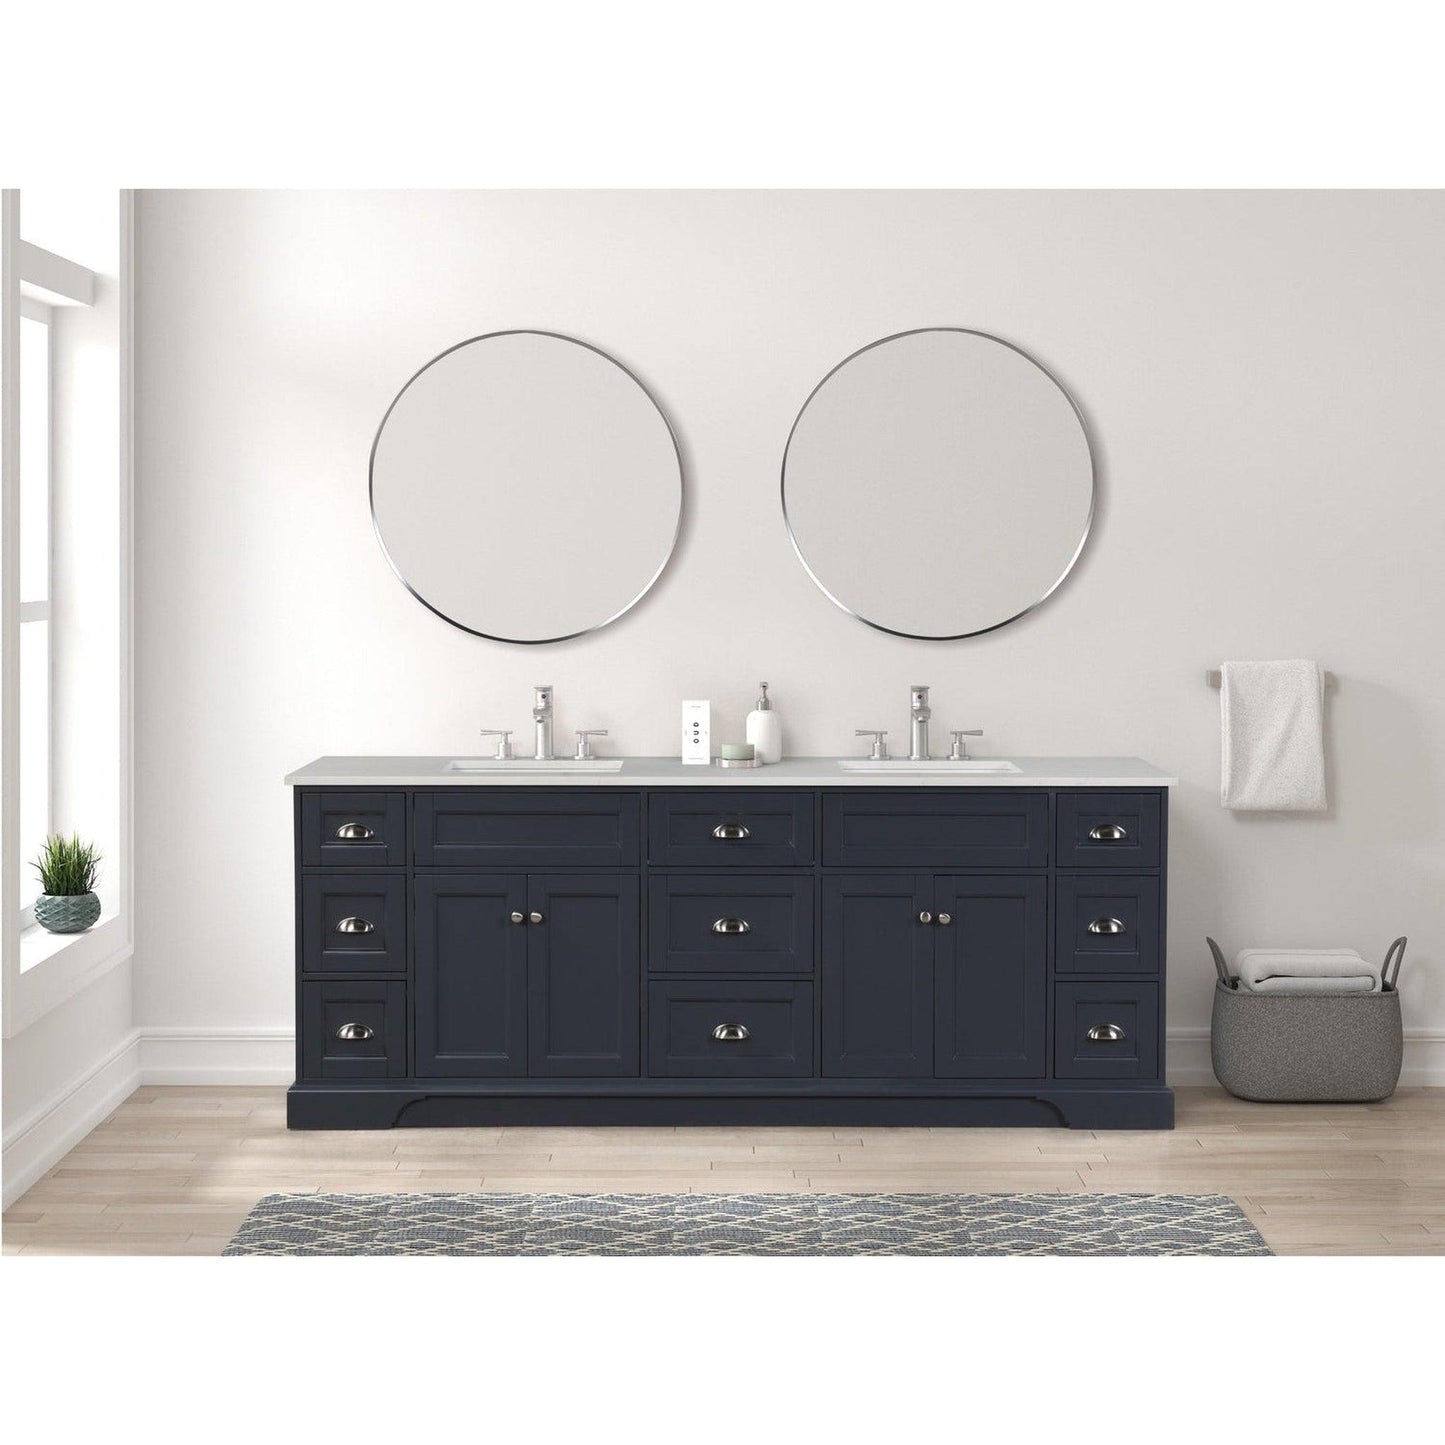 Eviva Epic 84" x 34" Charcoal Gray Freestanding Bathroom Vanity With Brushed Nickel Hardware and Quartz Countertop With Double Undermount Sink